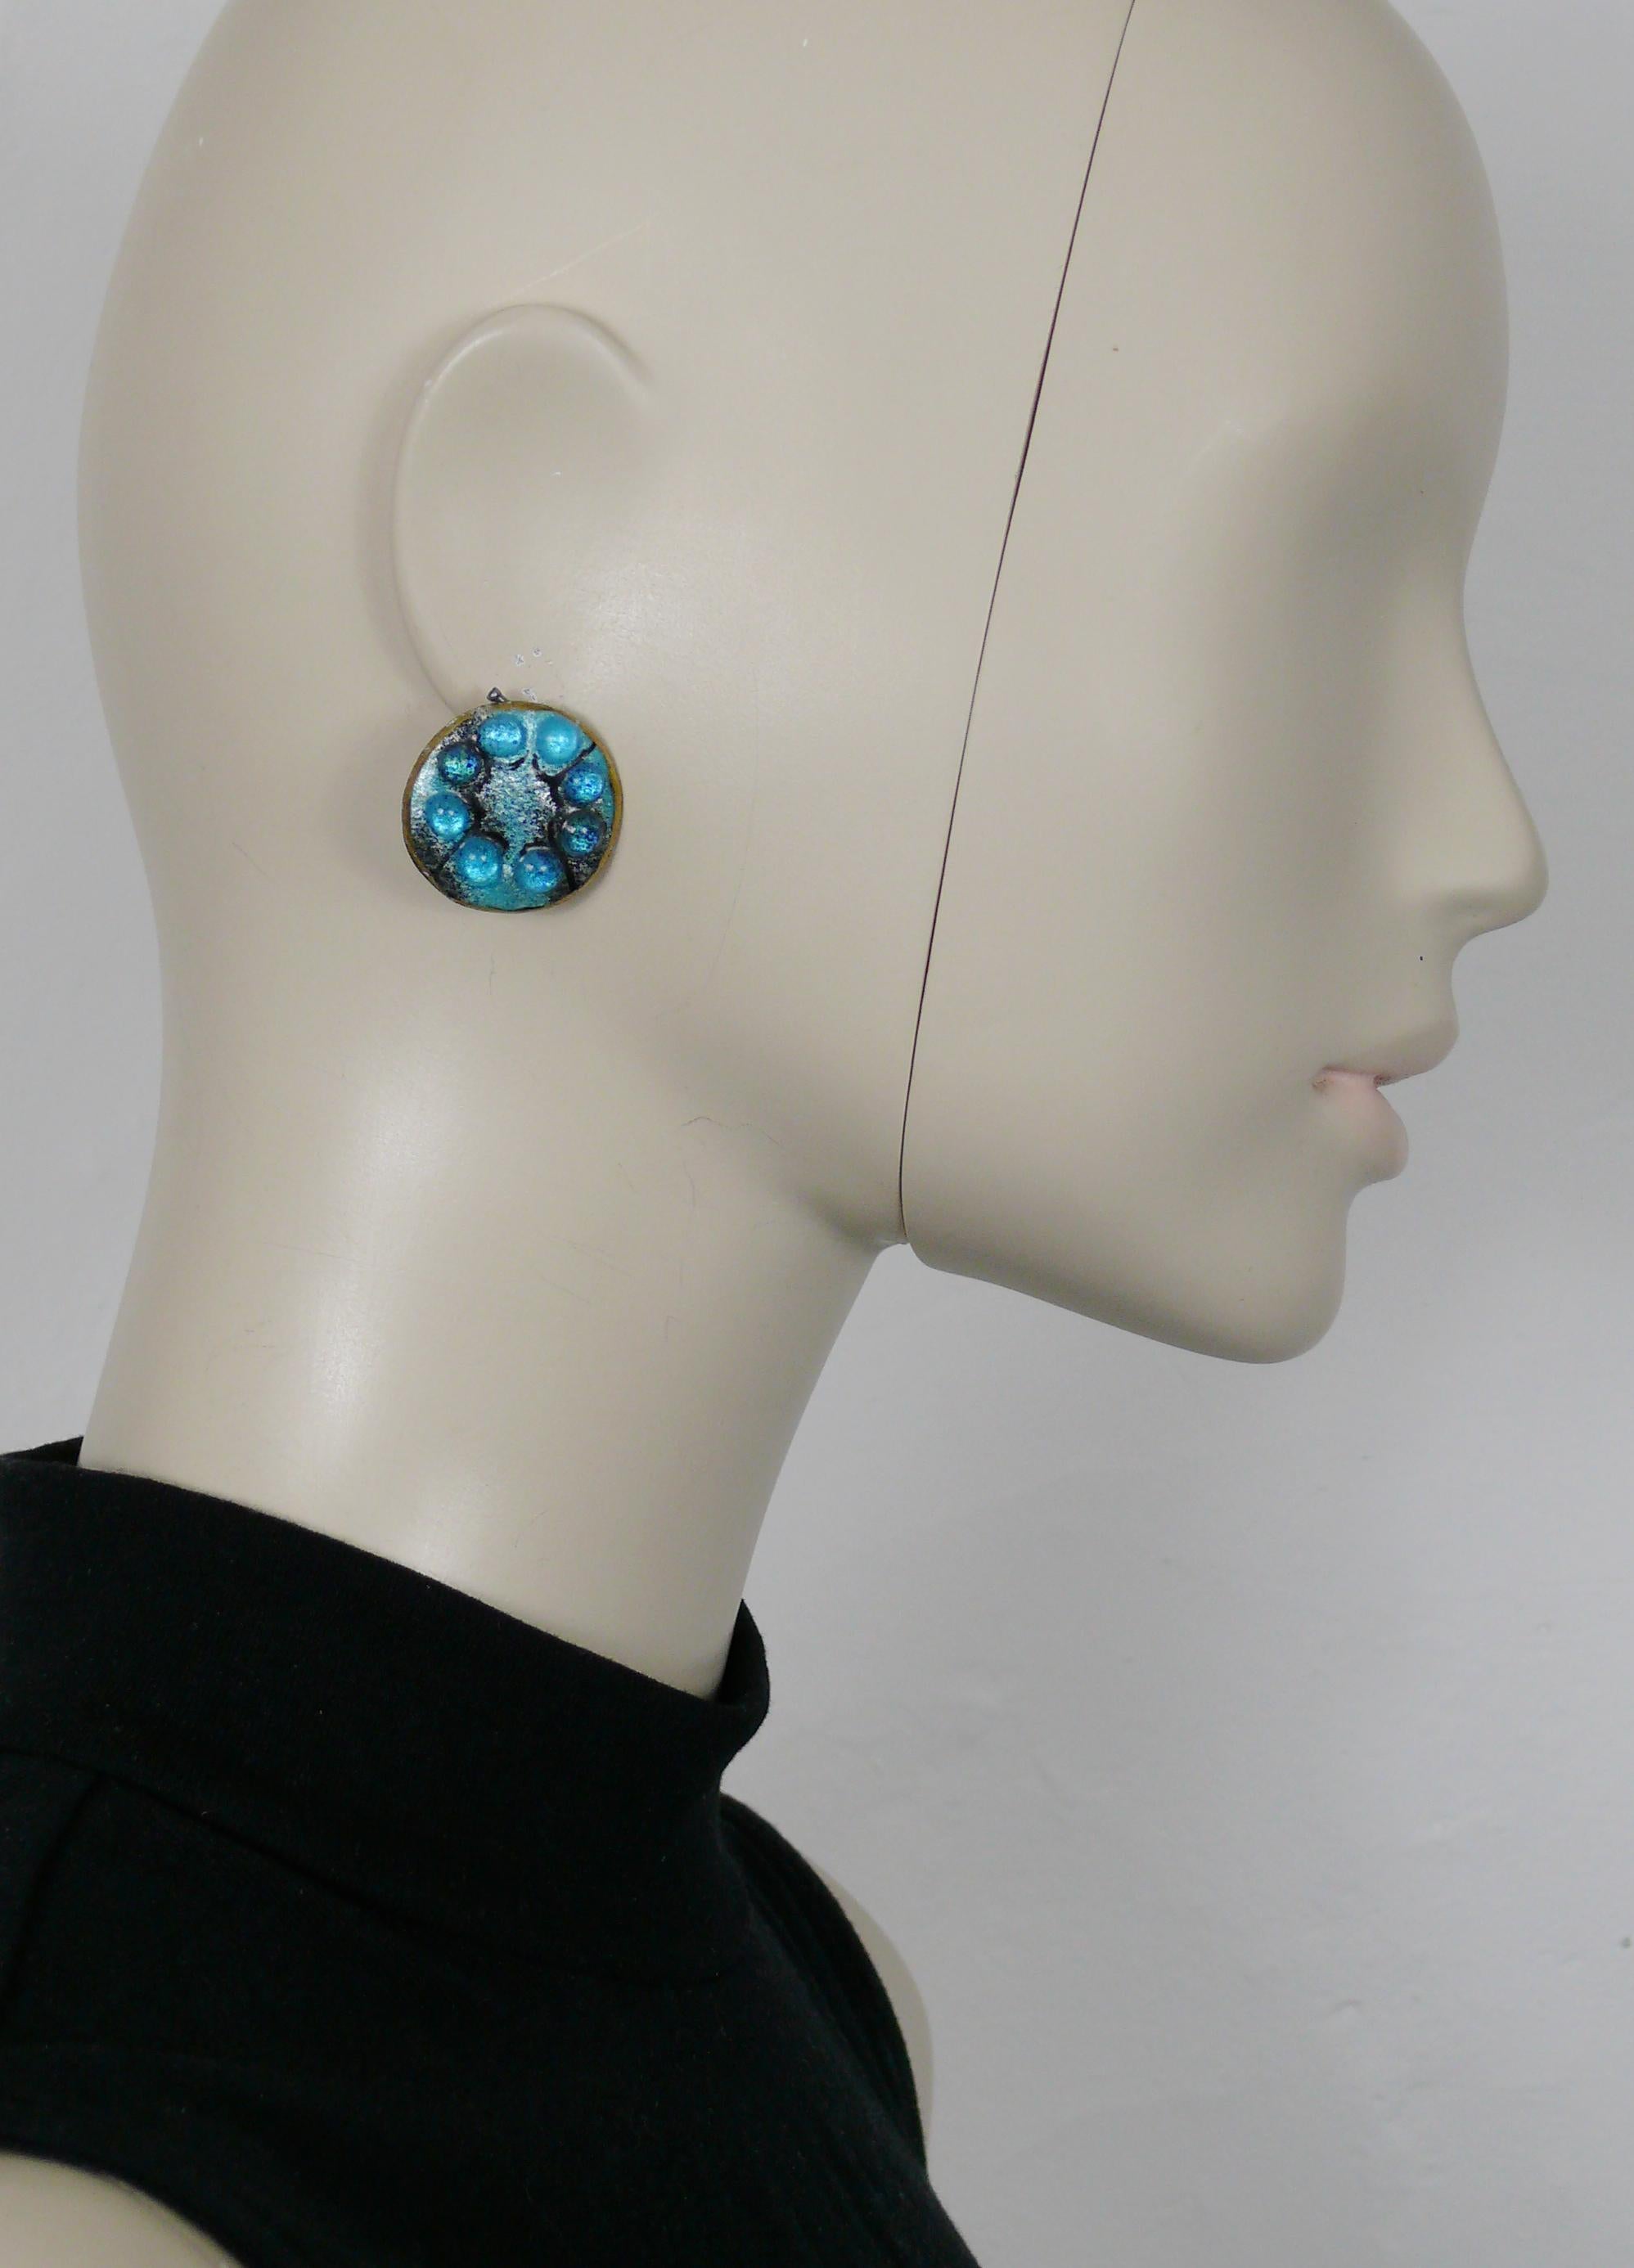 ANDREE BAZOT vintage disc clip-on earrings featuring blue shade enamel and glass cabochons.

Signed ANDREE BAZOT.

Indicative measurements : diameter approx. 2.6 cm (1.02 inches).

Weight per earring : 5 grams.

NOTES
- This is a preloved vintage